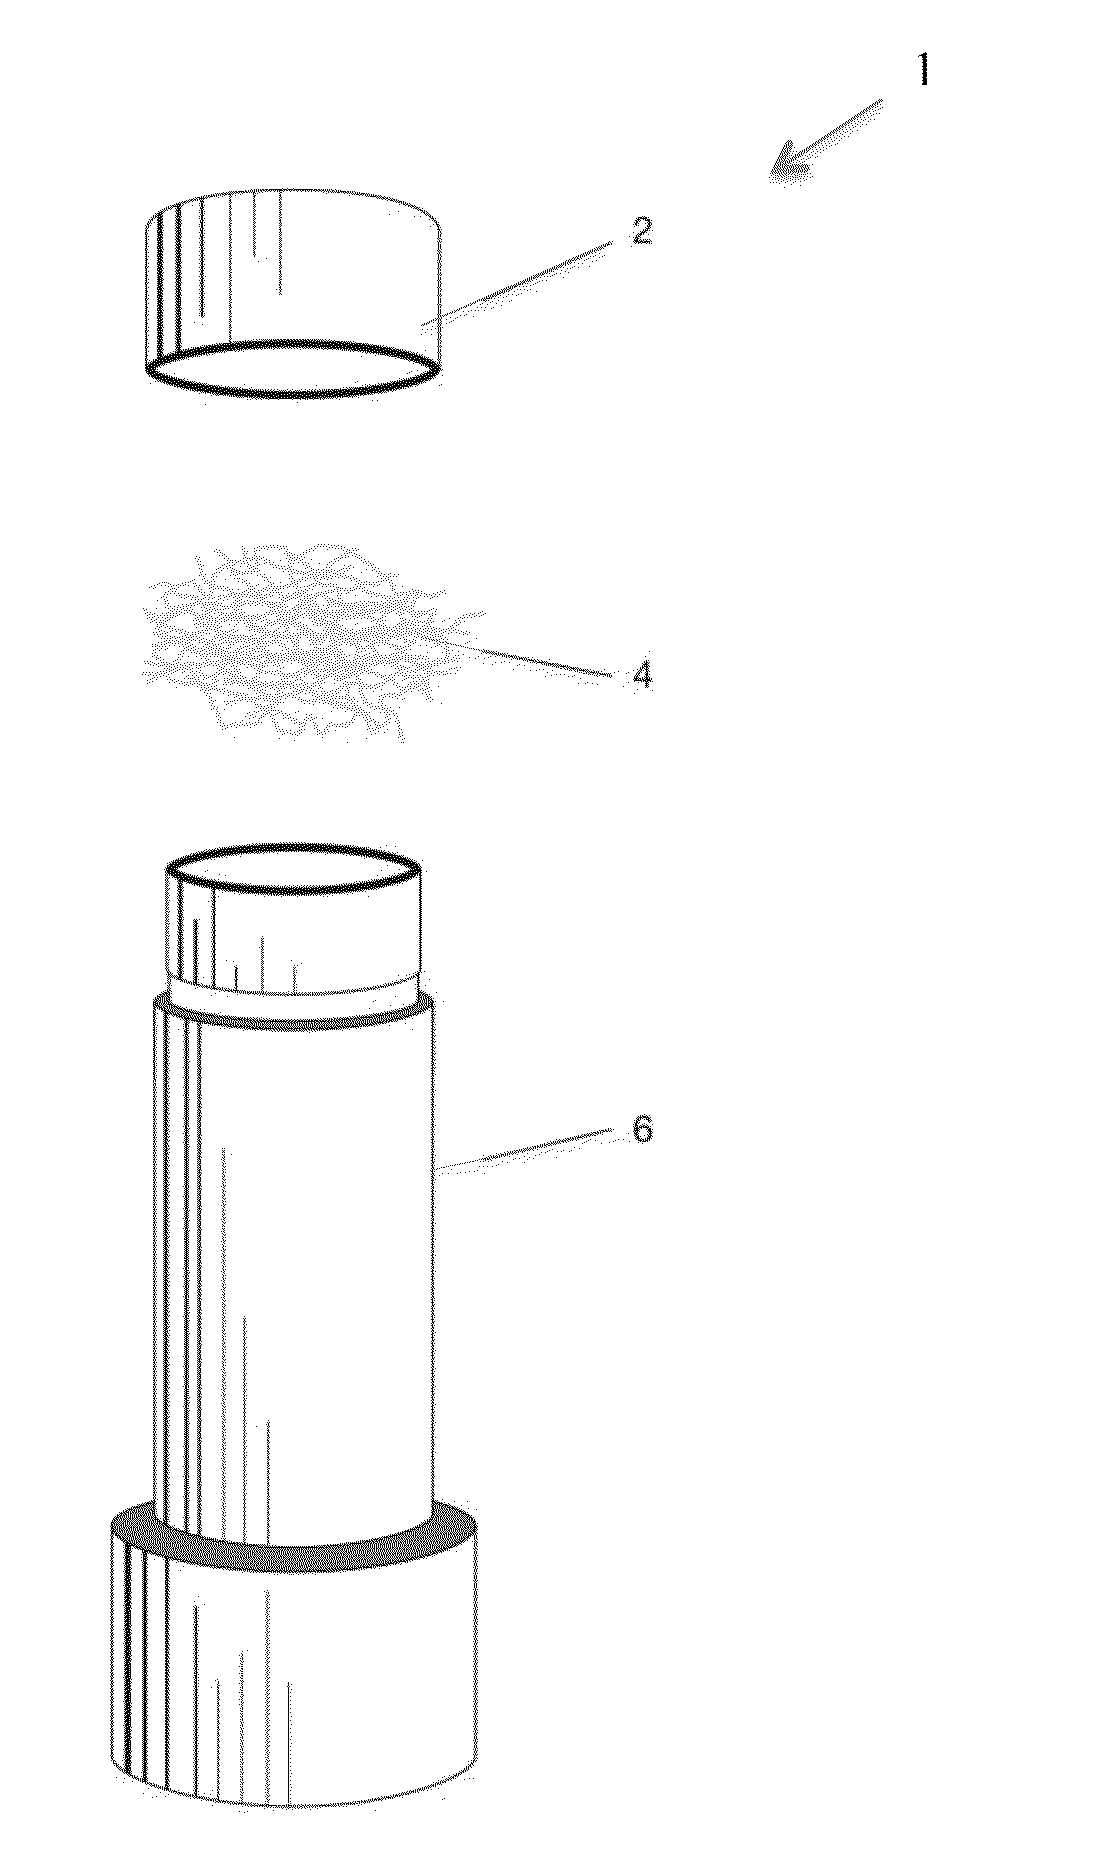 Composition, device, and method for biological air sampling